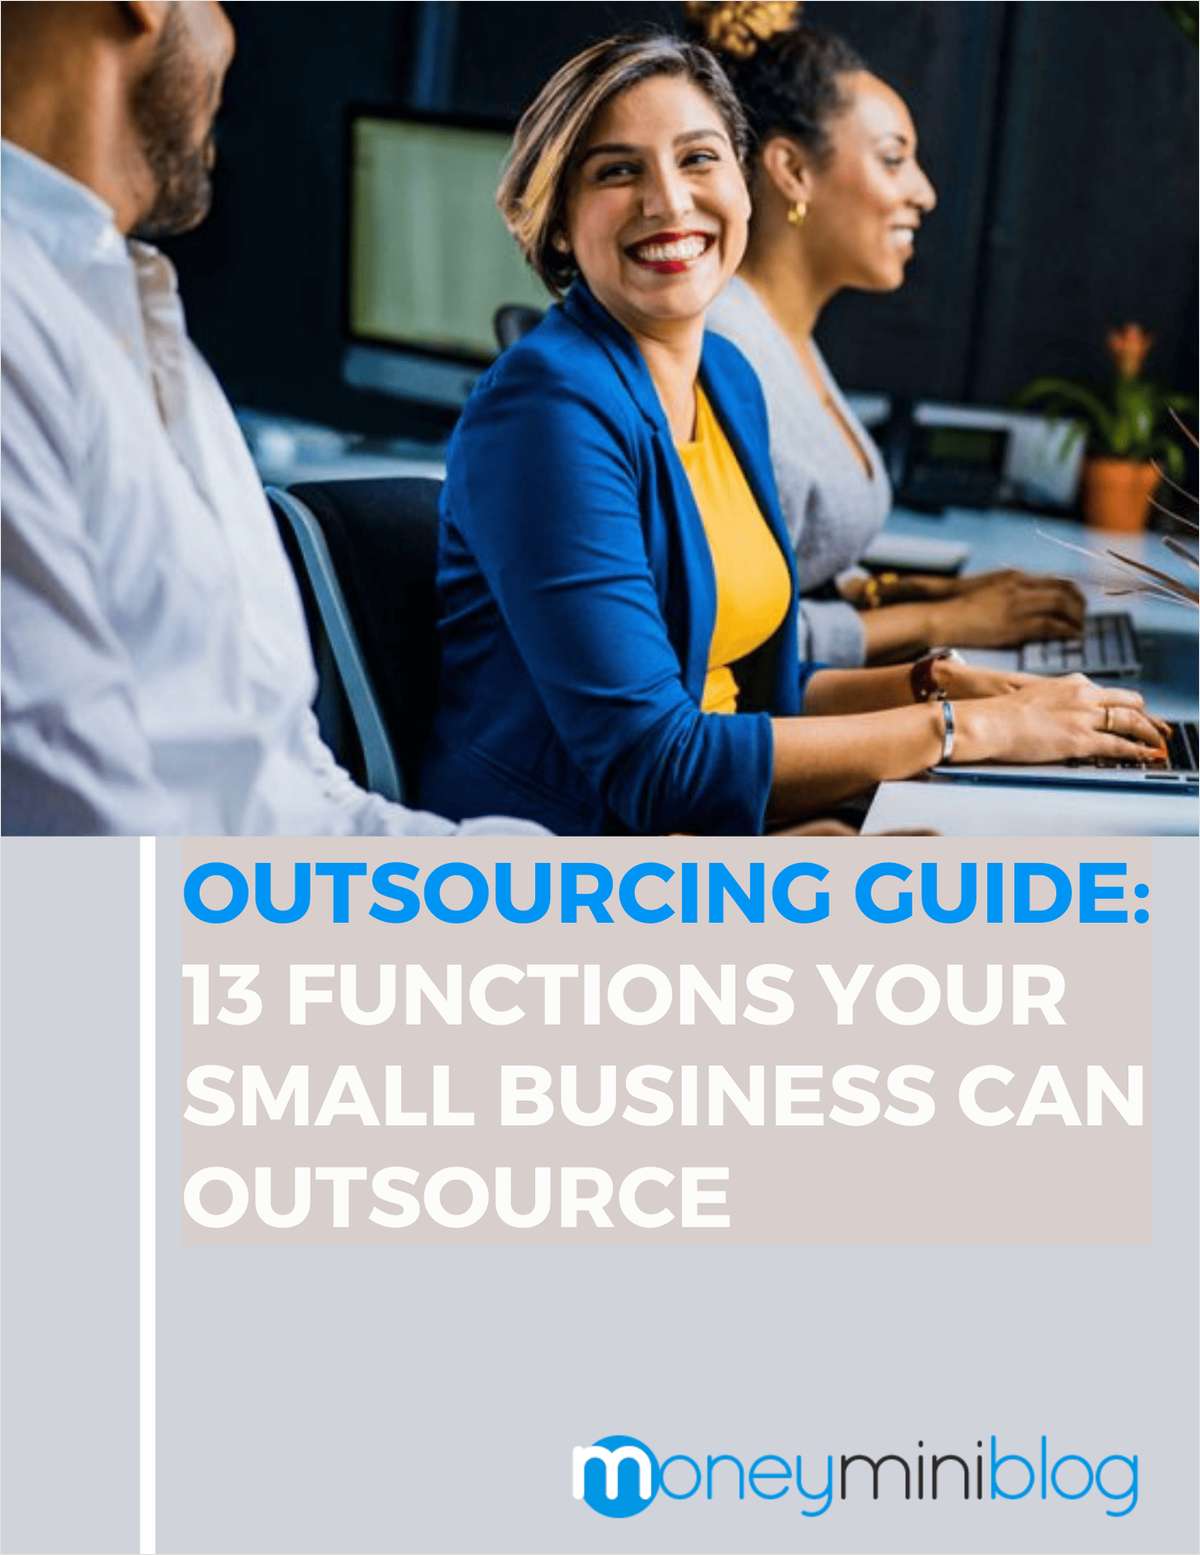 Outsourcing Guide: 13 Functions Your Small Business Can Outsource